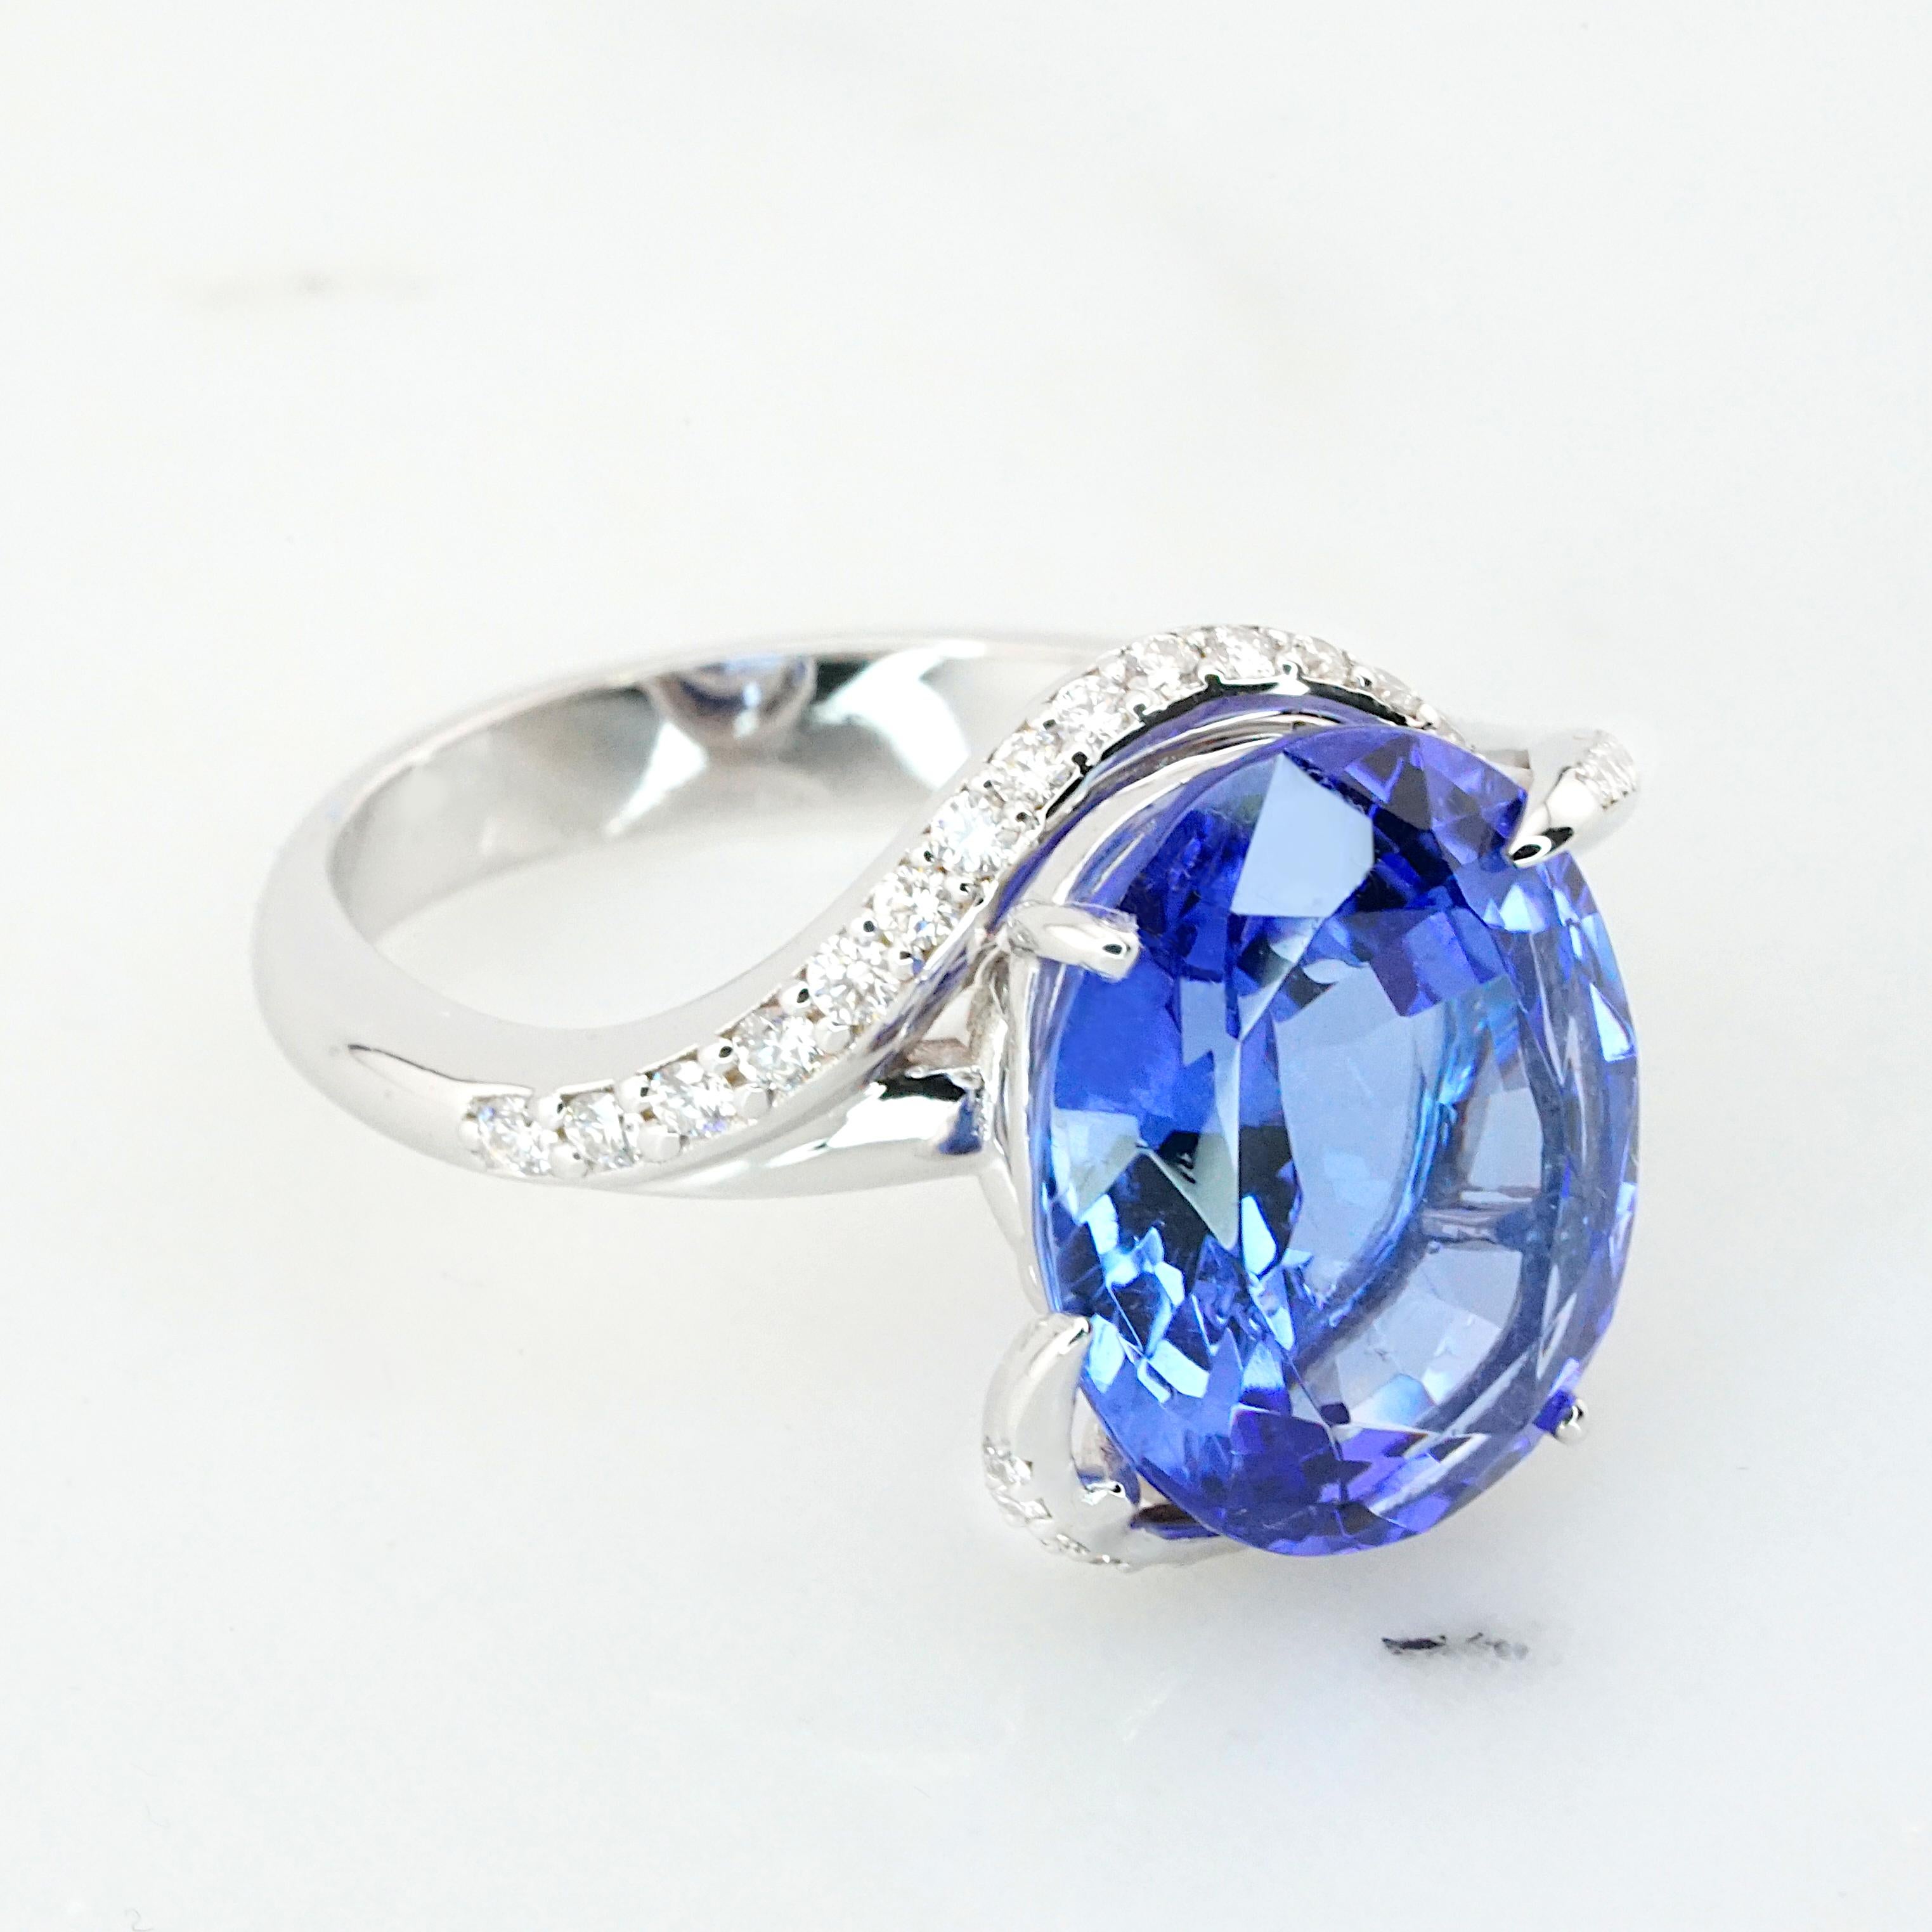 Presenting an extraordinary 7-carat Blue Violet Tanzanite, vivid in color and certified by EGL South Africa, set in an exquisite 18K white gold ring. The captivating design features a beautiful spiral that accentuates the Tanzanite's allure. The